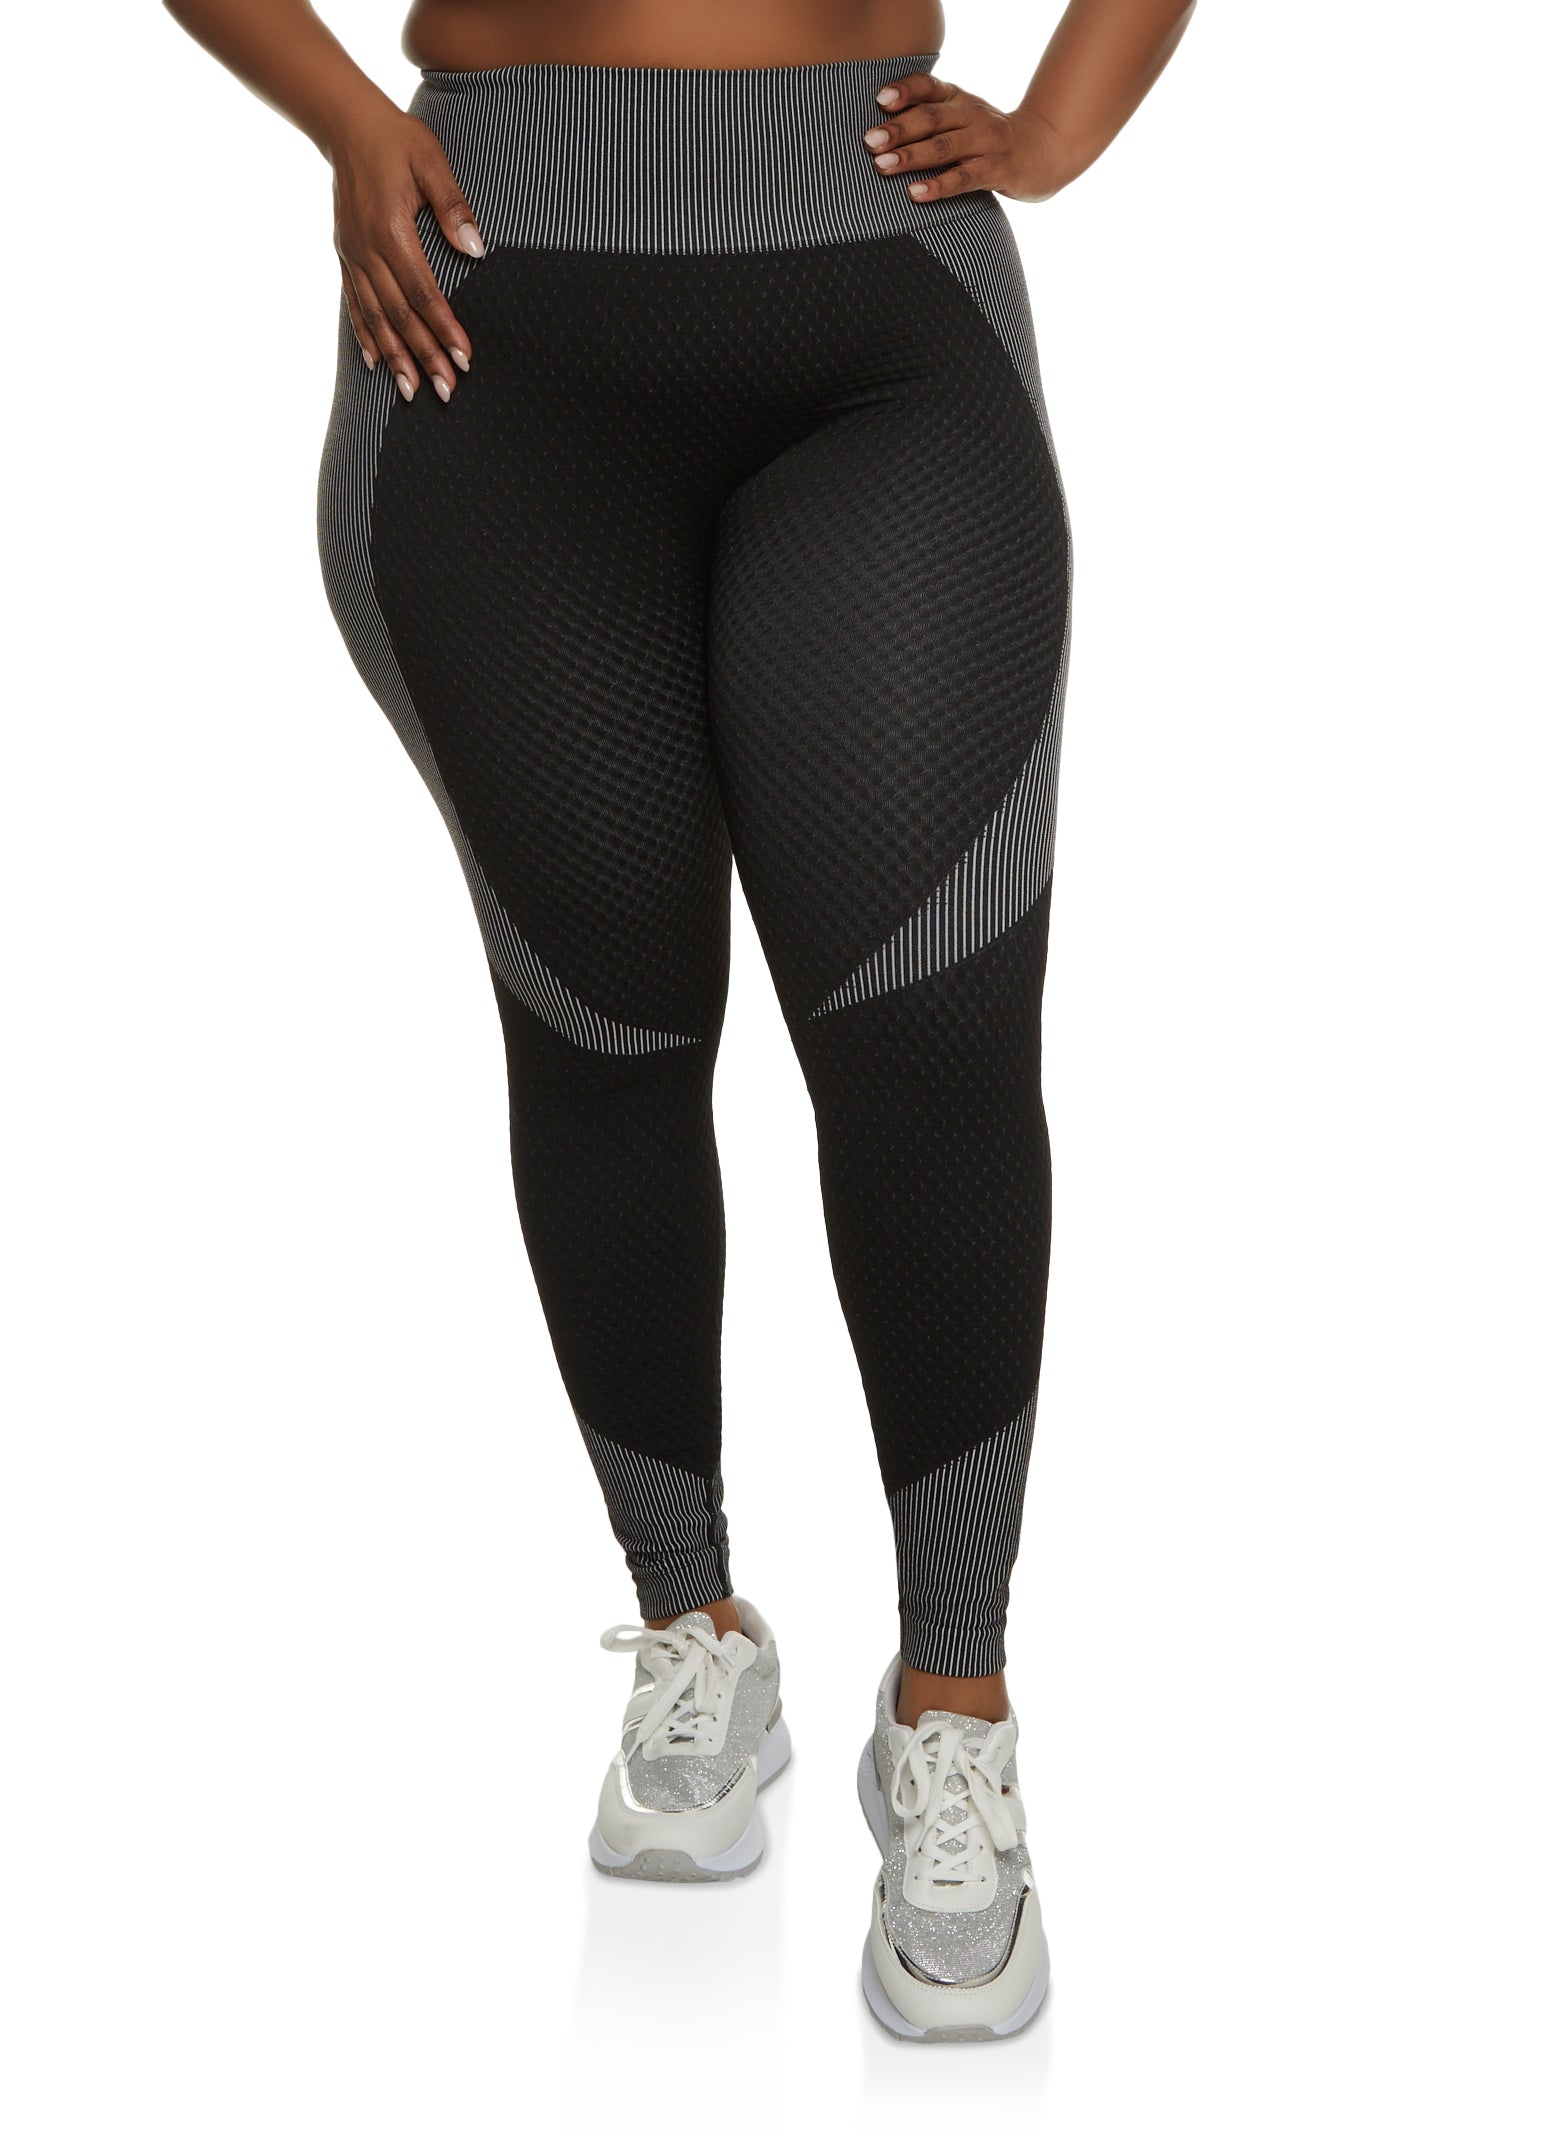 Extra High-Waisted Crossover Rib-Knit 7/8-Length Leggings for Women